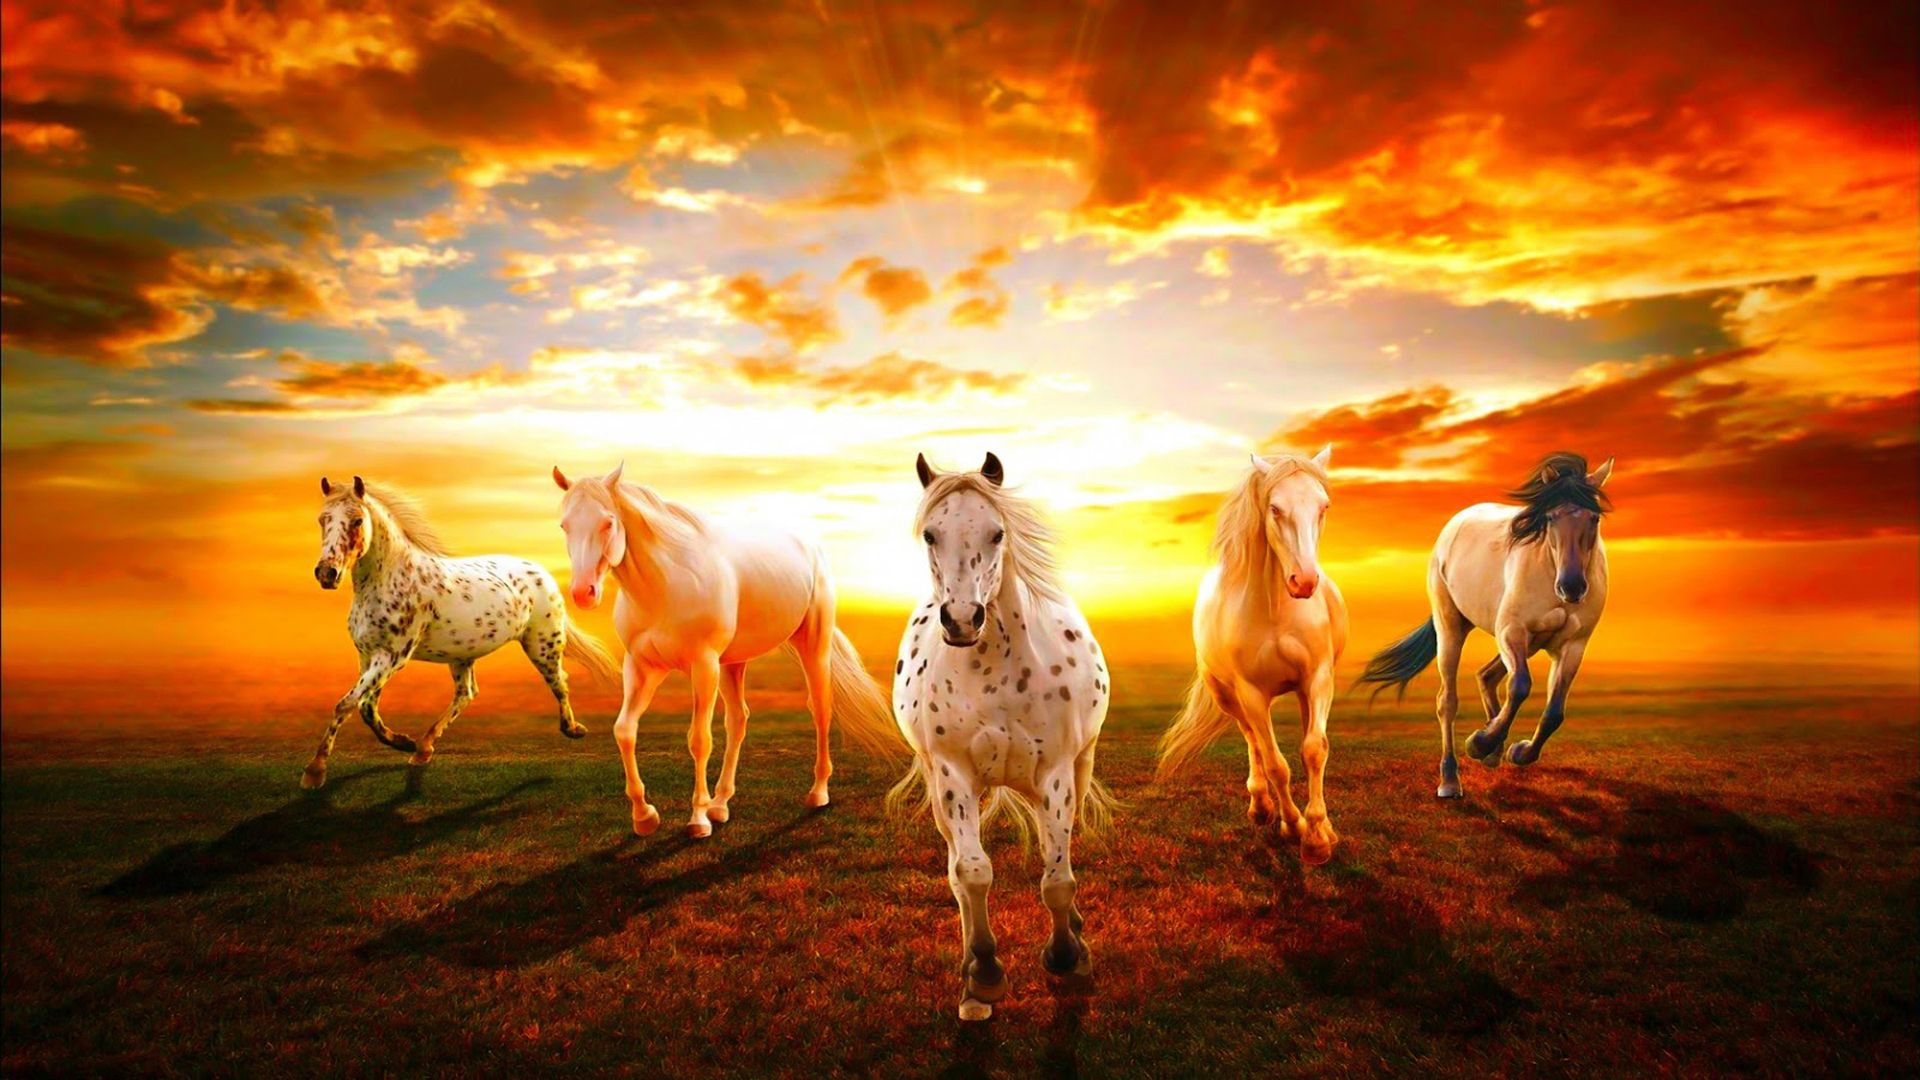 a group of wild horses racing at sunset HD Wallpaper. Background